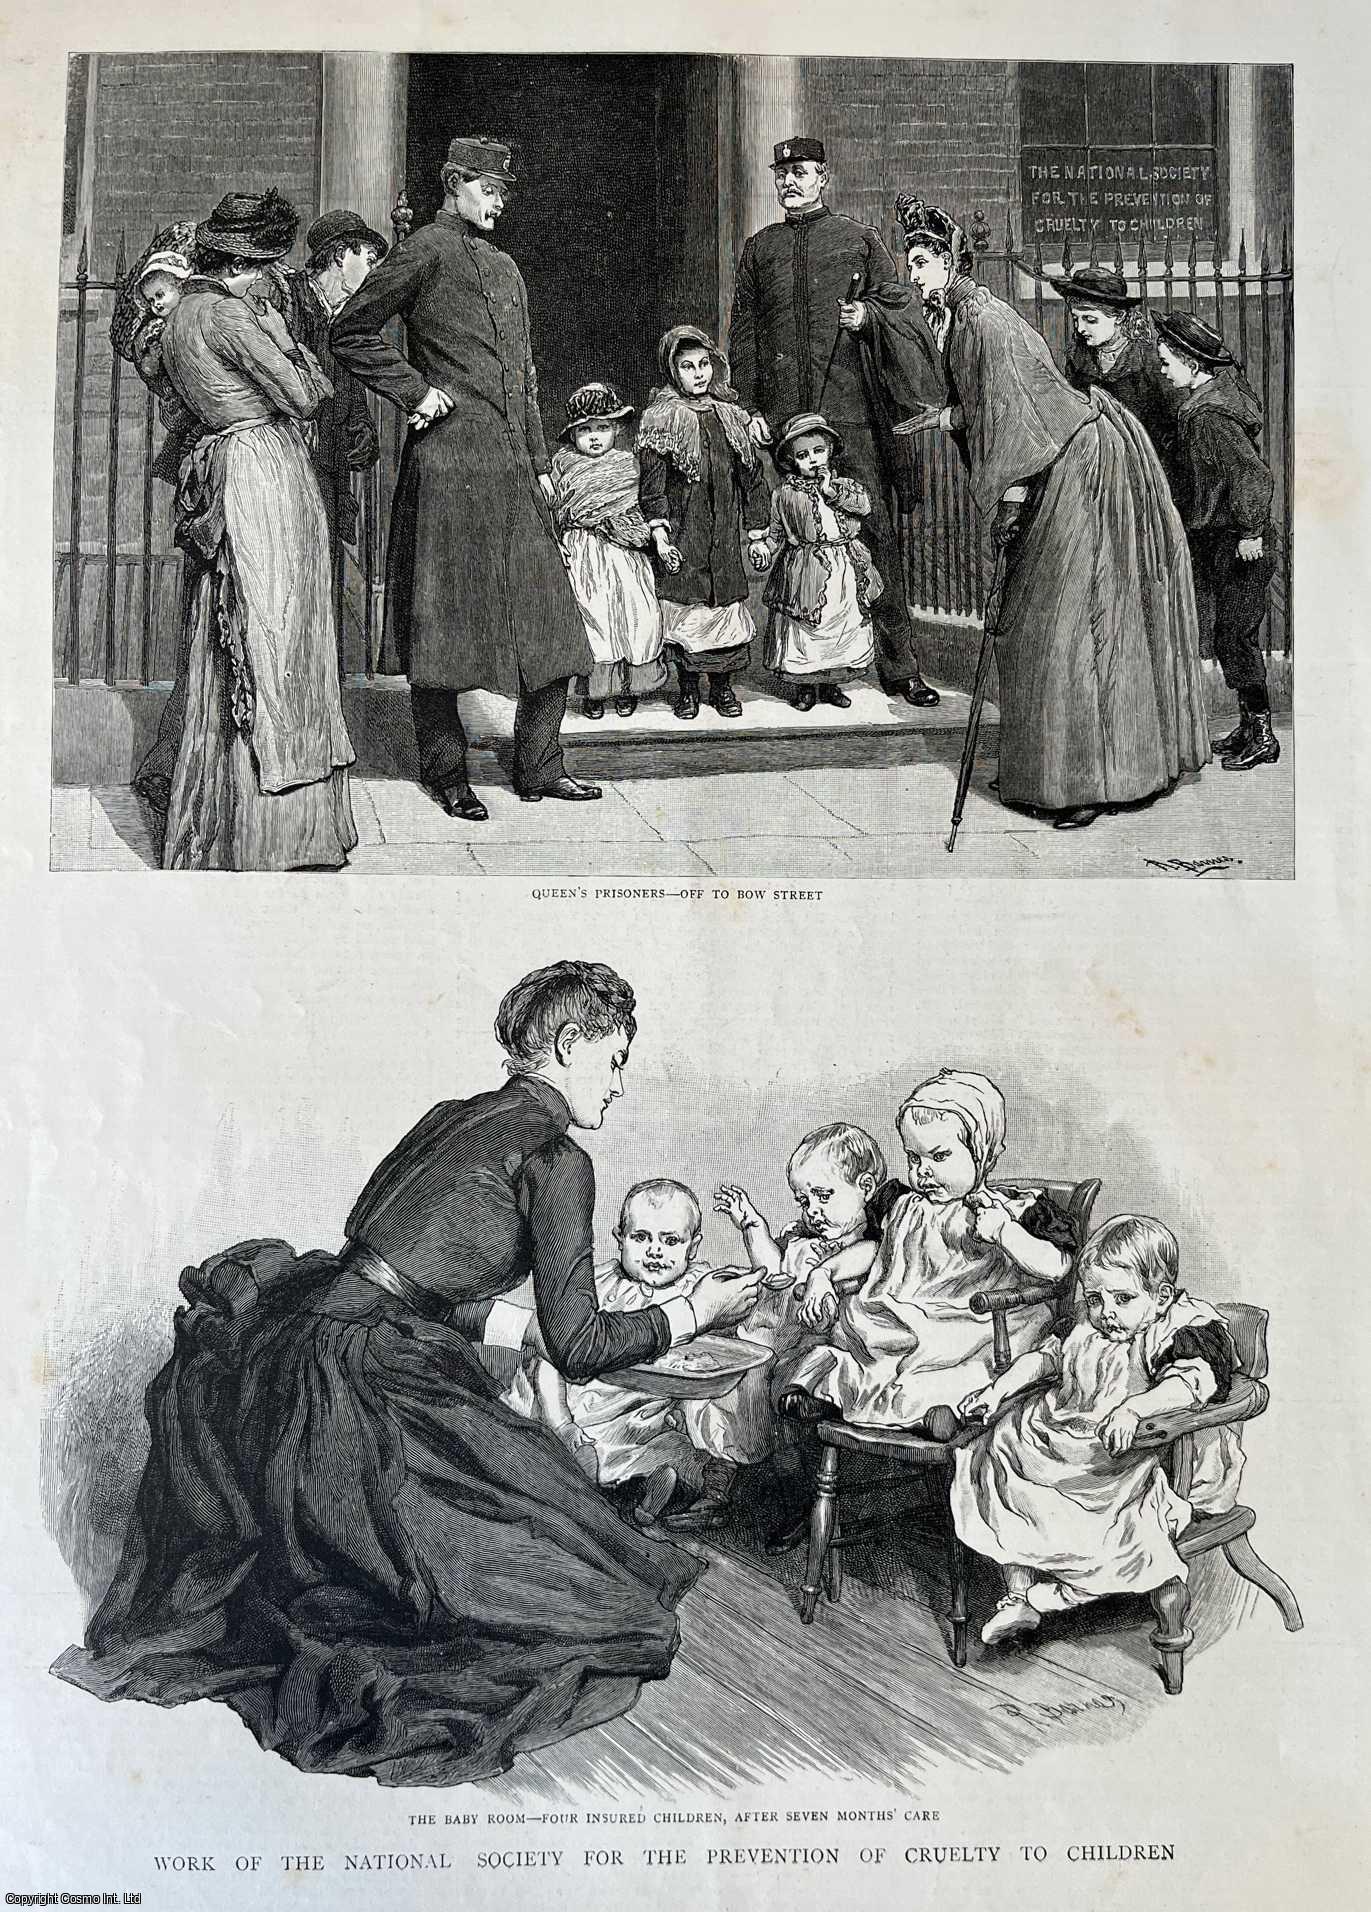 N.S.P.C.C. - Work of the National Society for the Prevention of Cruelty to Children. Two original woodcut engravings, from the Graphic Illustrated Weekly Magazine, 1889.